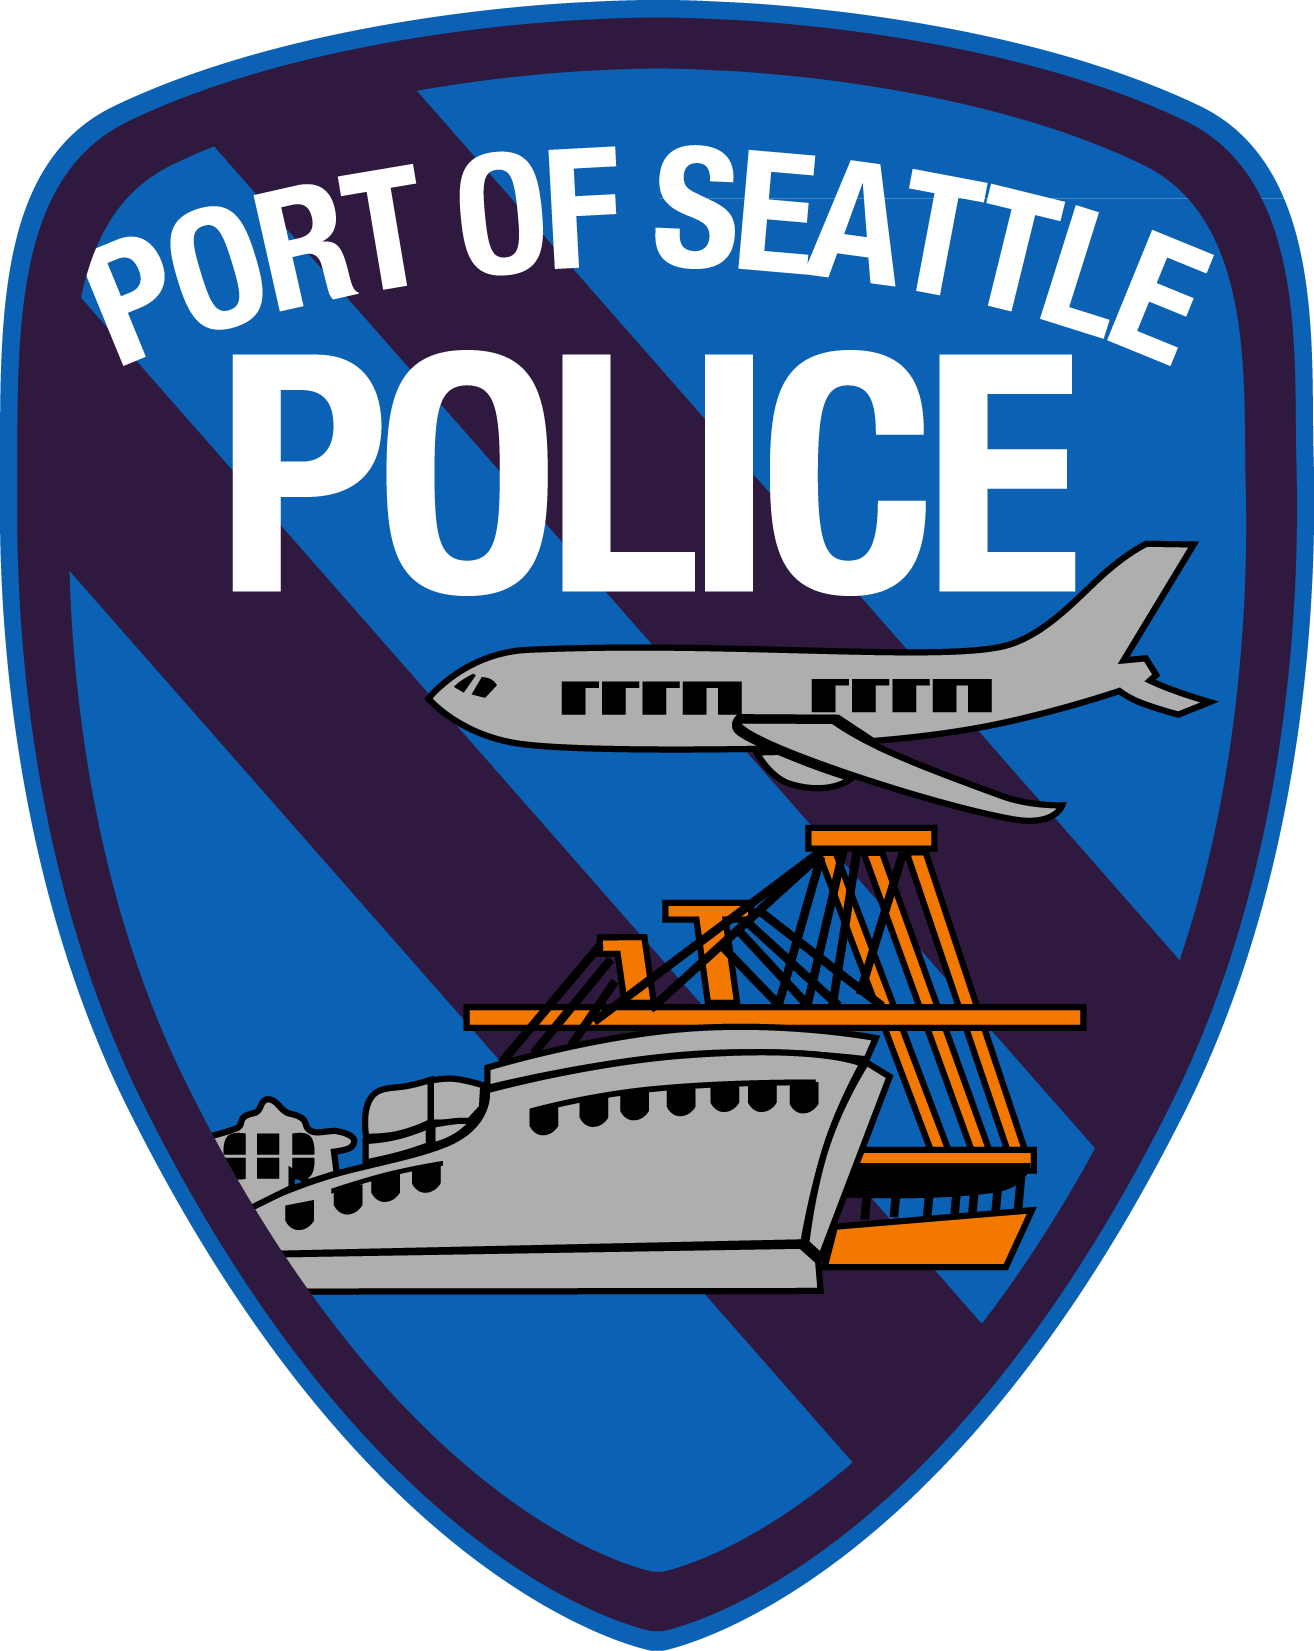 Port of Seattle Police Department Implements eSOPH to Streamline Hiring Process.